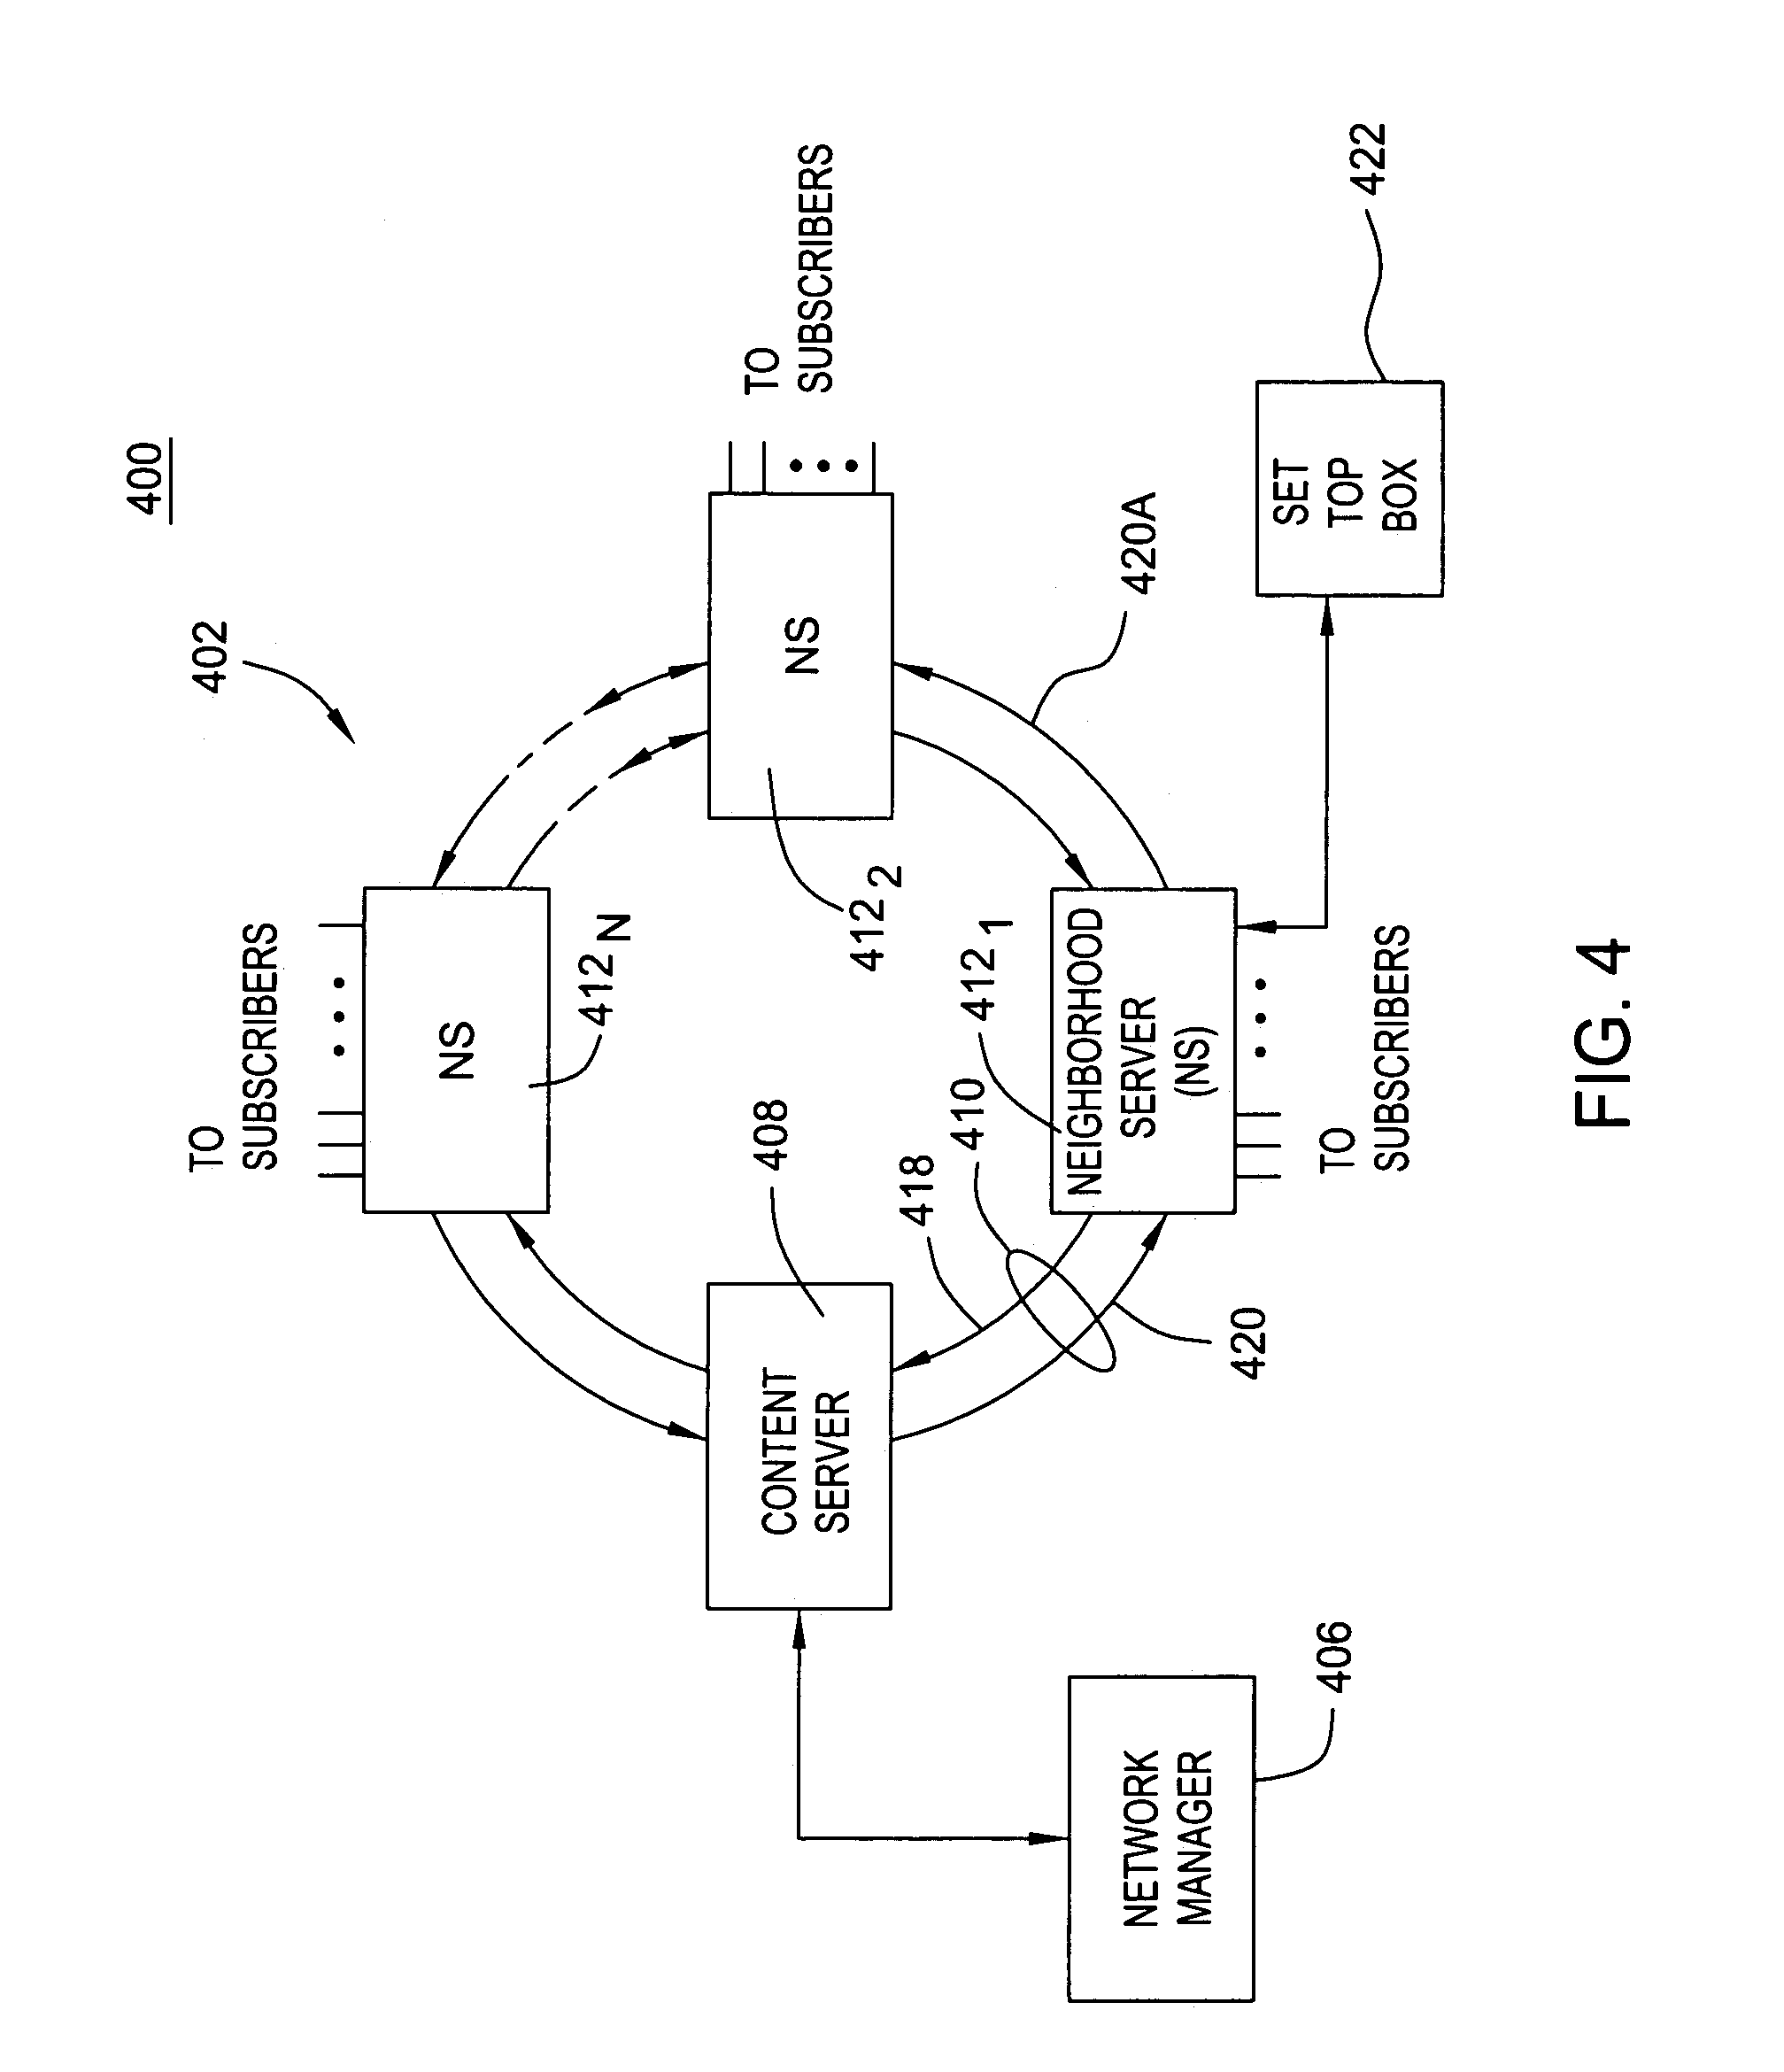 Asynchronous serial interface (ASI) ring network for digital information distribution